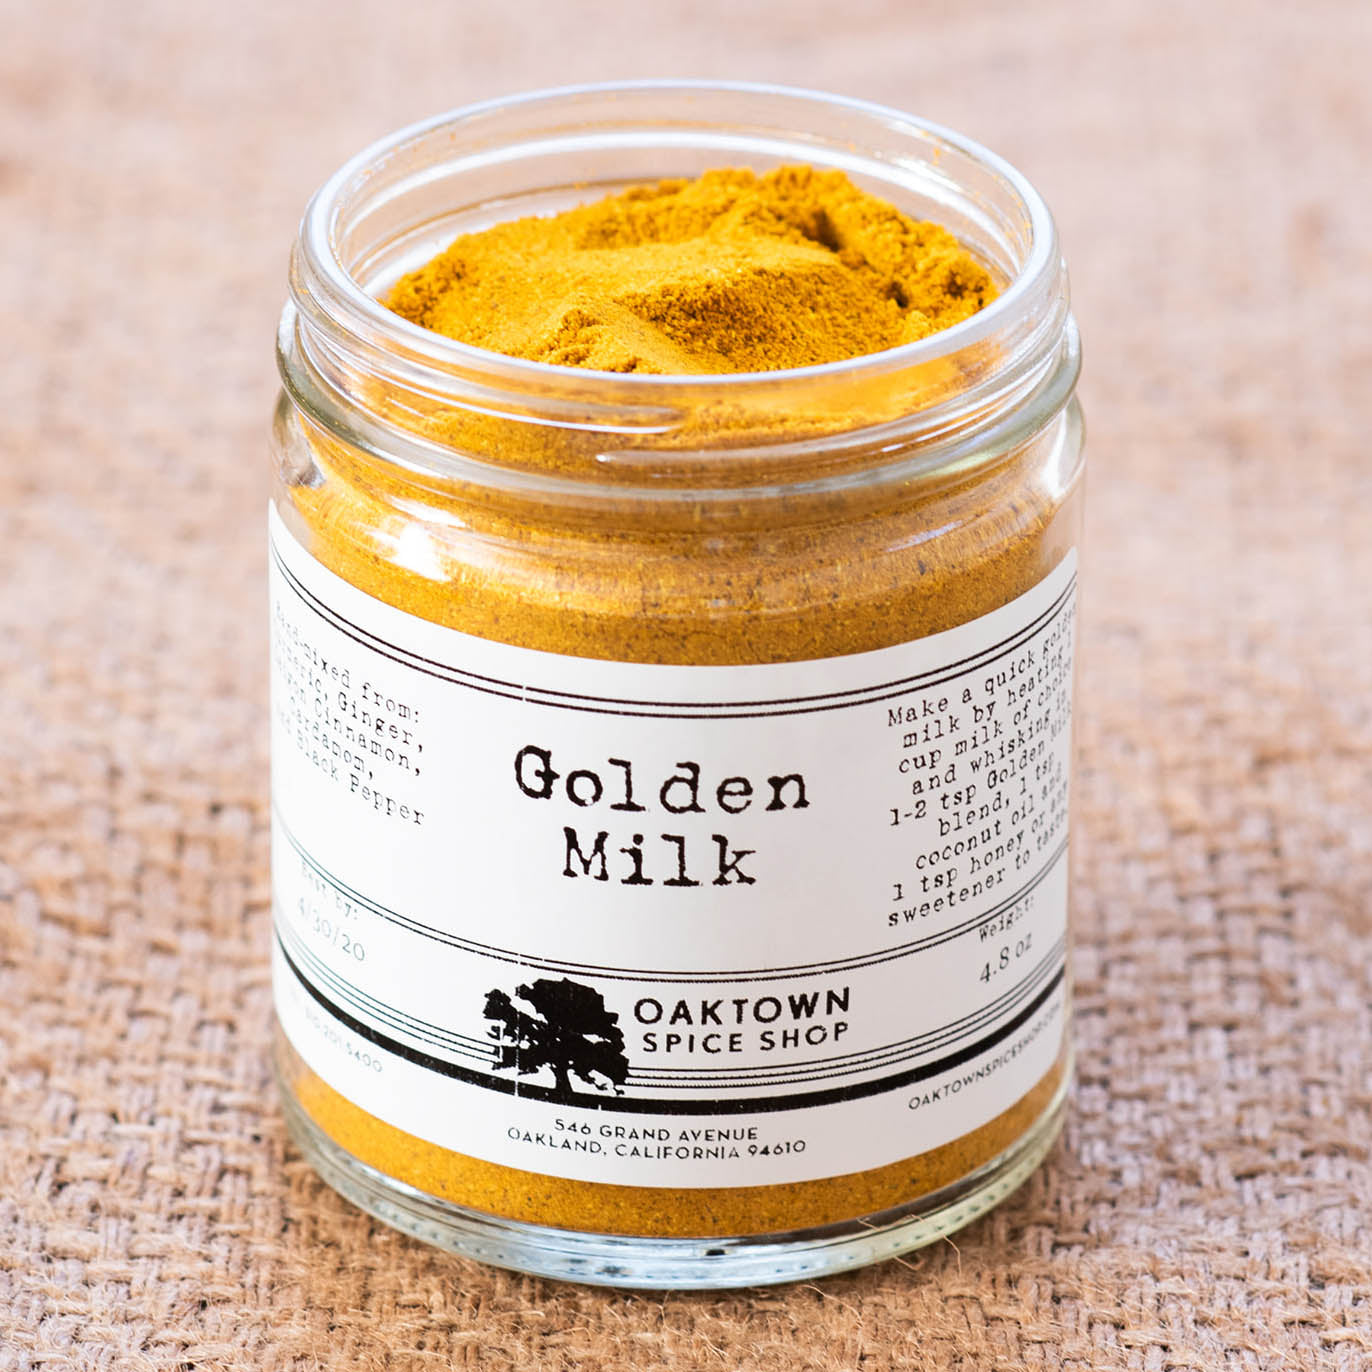 Oaktown Spice Shop Golden Milk blend has earthy notes of turmeric that pair with warming spices and your favorite milk to create an aromatic, creamy beverage with the added plus of potential health benefits. Our Golden Milk is hand-mixed from turmeric, ginger, Saigon cinnamon, cardamom and black pepper. 